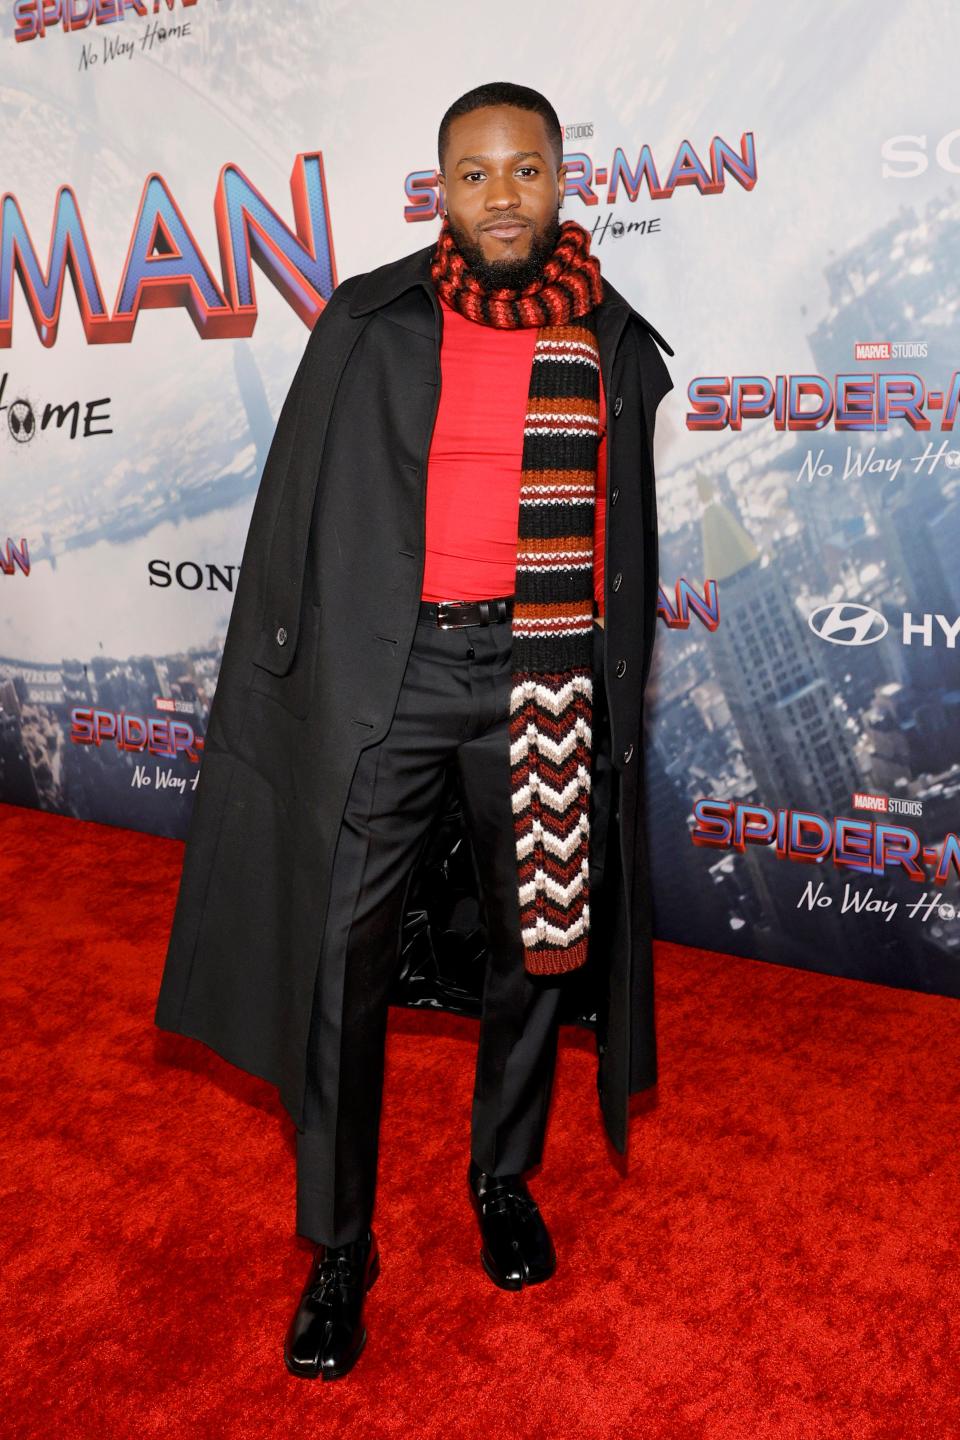 In the Know: Edison Awards honored actor and rapper Shameik Moore, who is launching a new e-commerce platform designed to build economic and cultural development in African-American communities. Here, he attends the premiere of "Spider-Man: No Way Home" in December 2021.